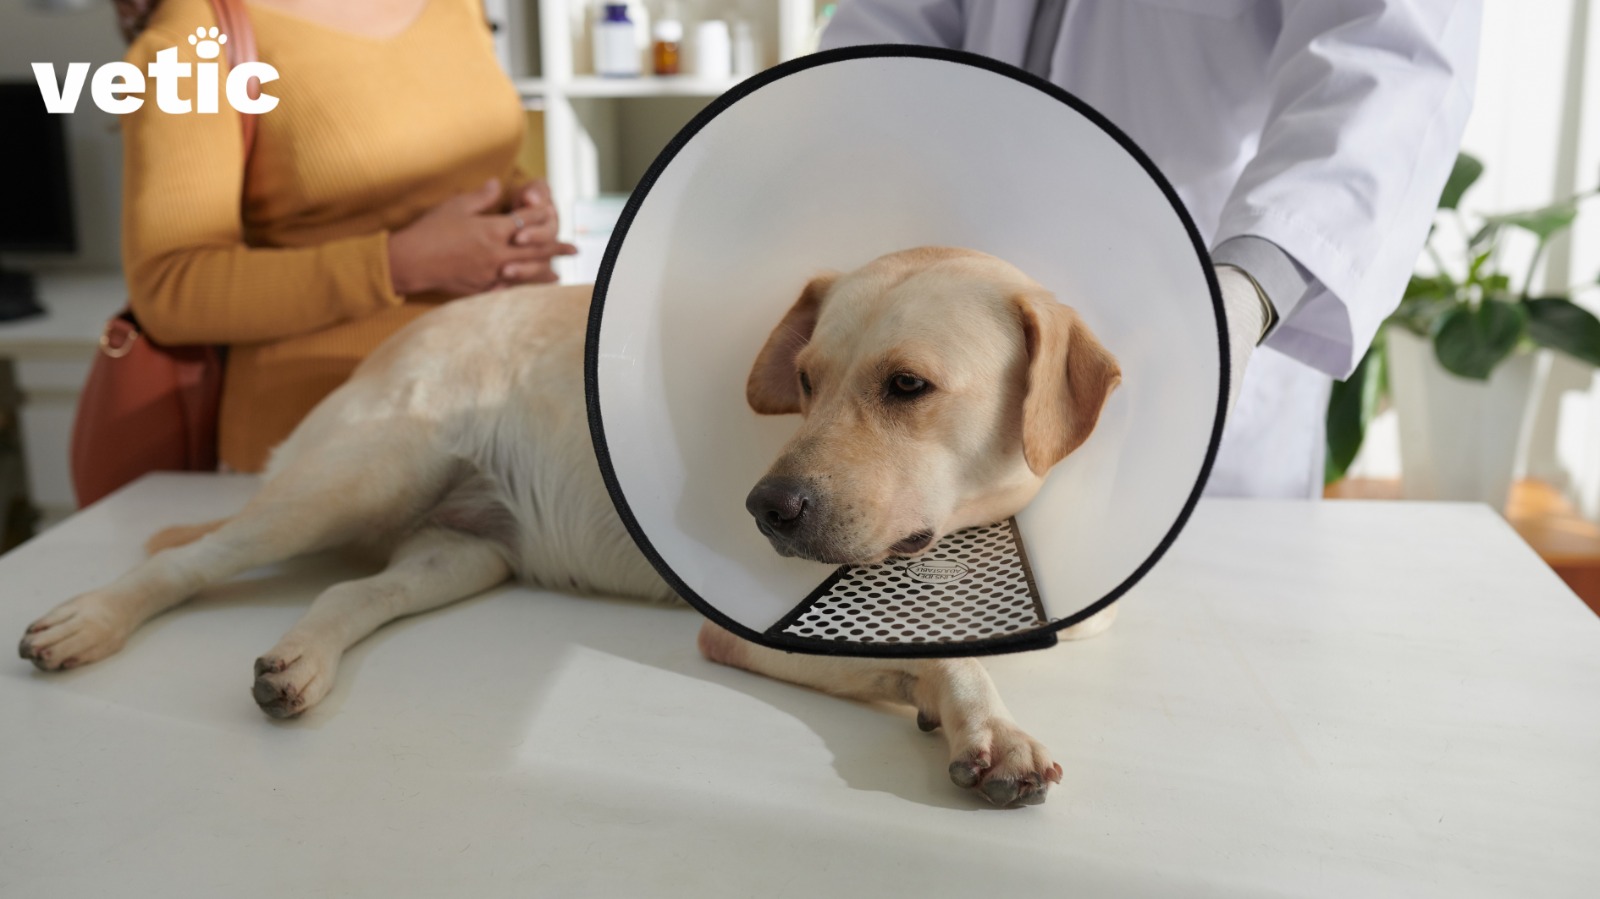 An adult Labrador retriever dog sitting on the white examination table at the vet's office wearing an e-collar. the Vet and owner are visible in the background. E-collars are common requirement for dogs if your dog has received wound cleaning and treatment after being bitten by another dog.